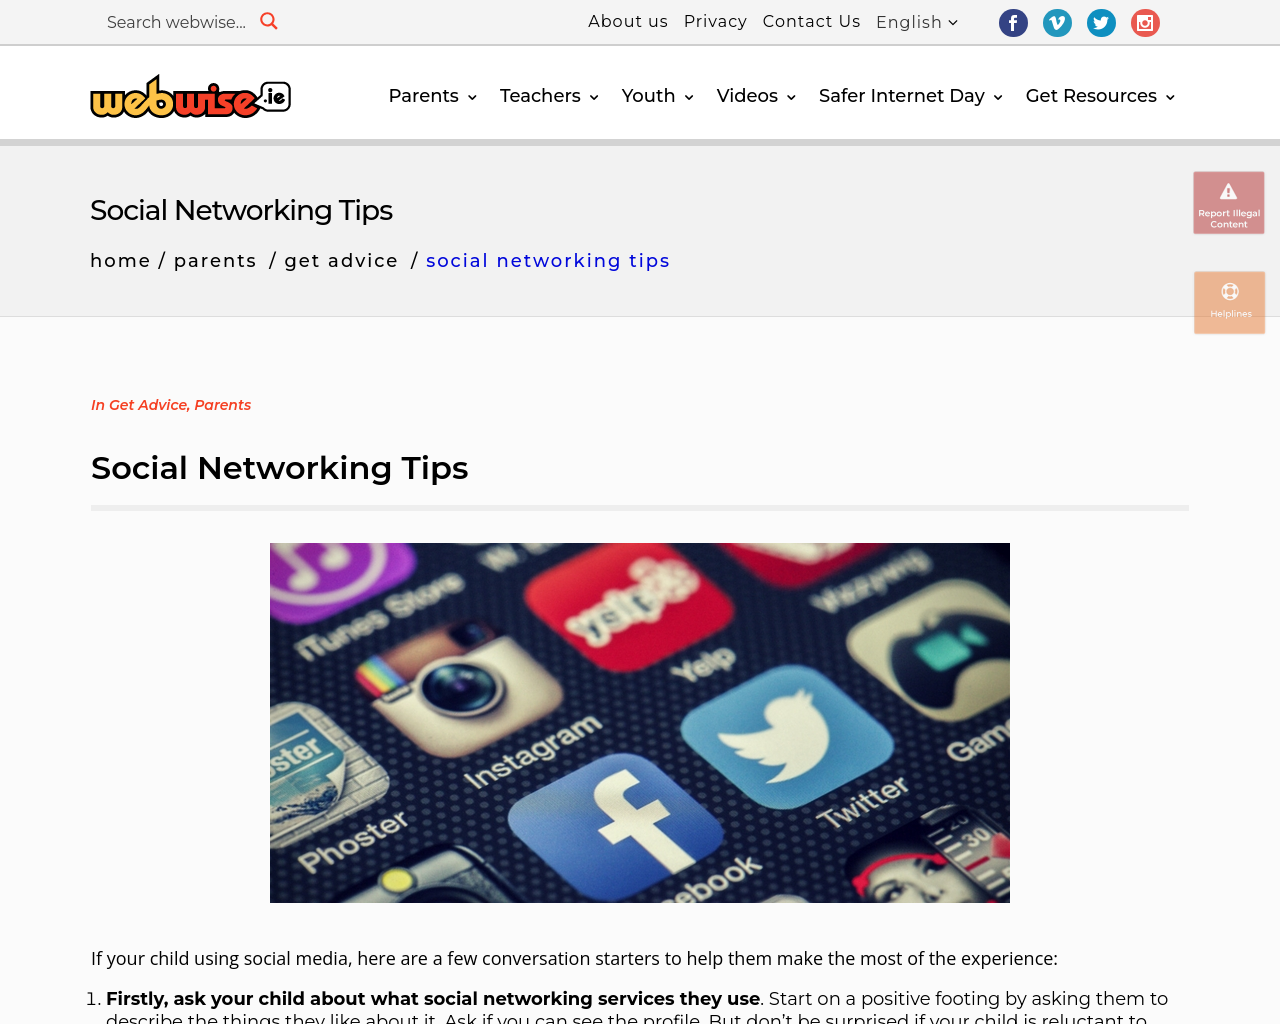 Parents advice social networking tips